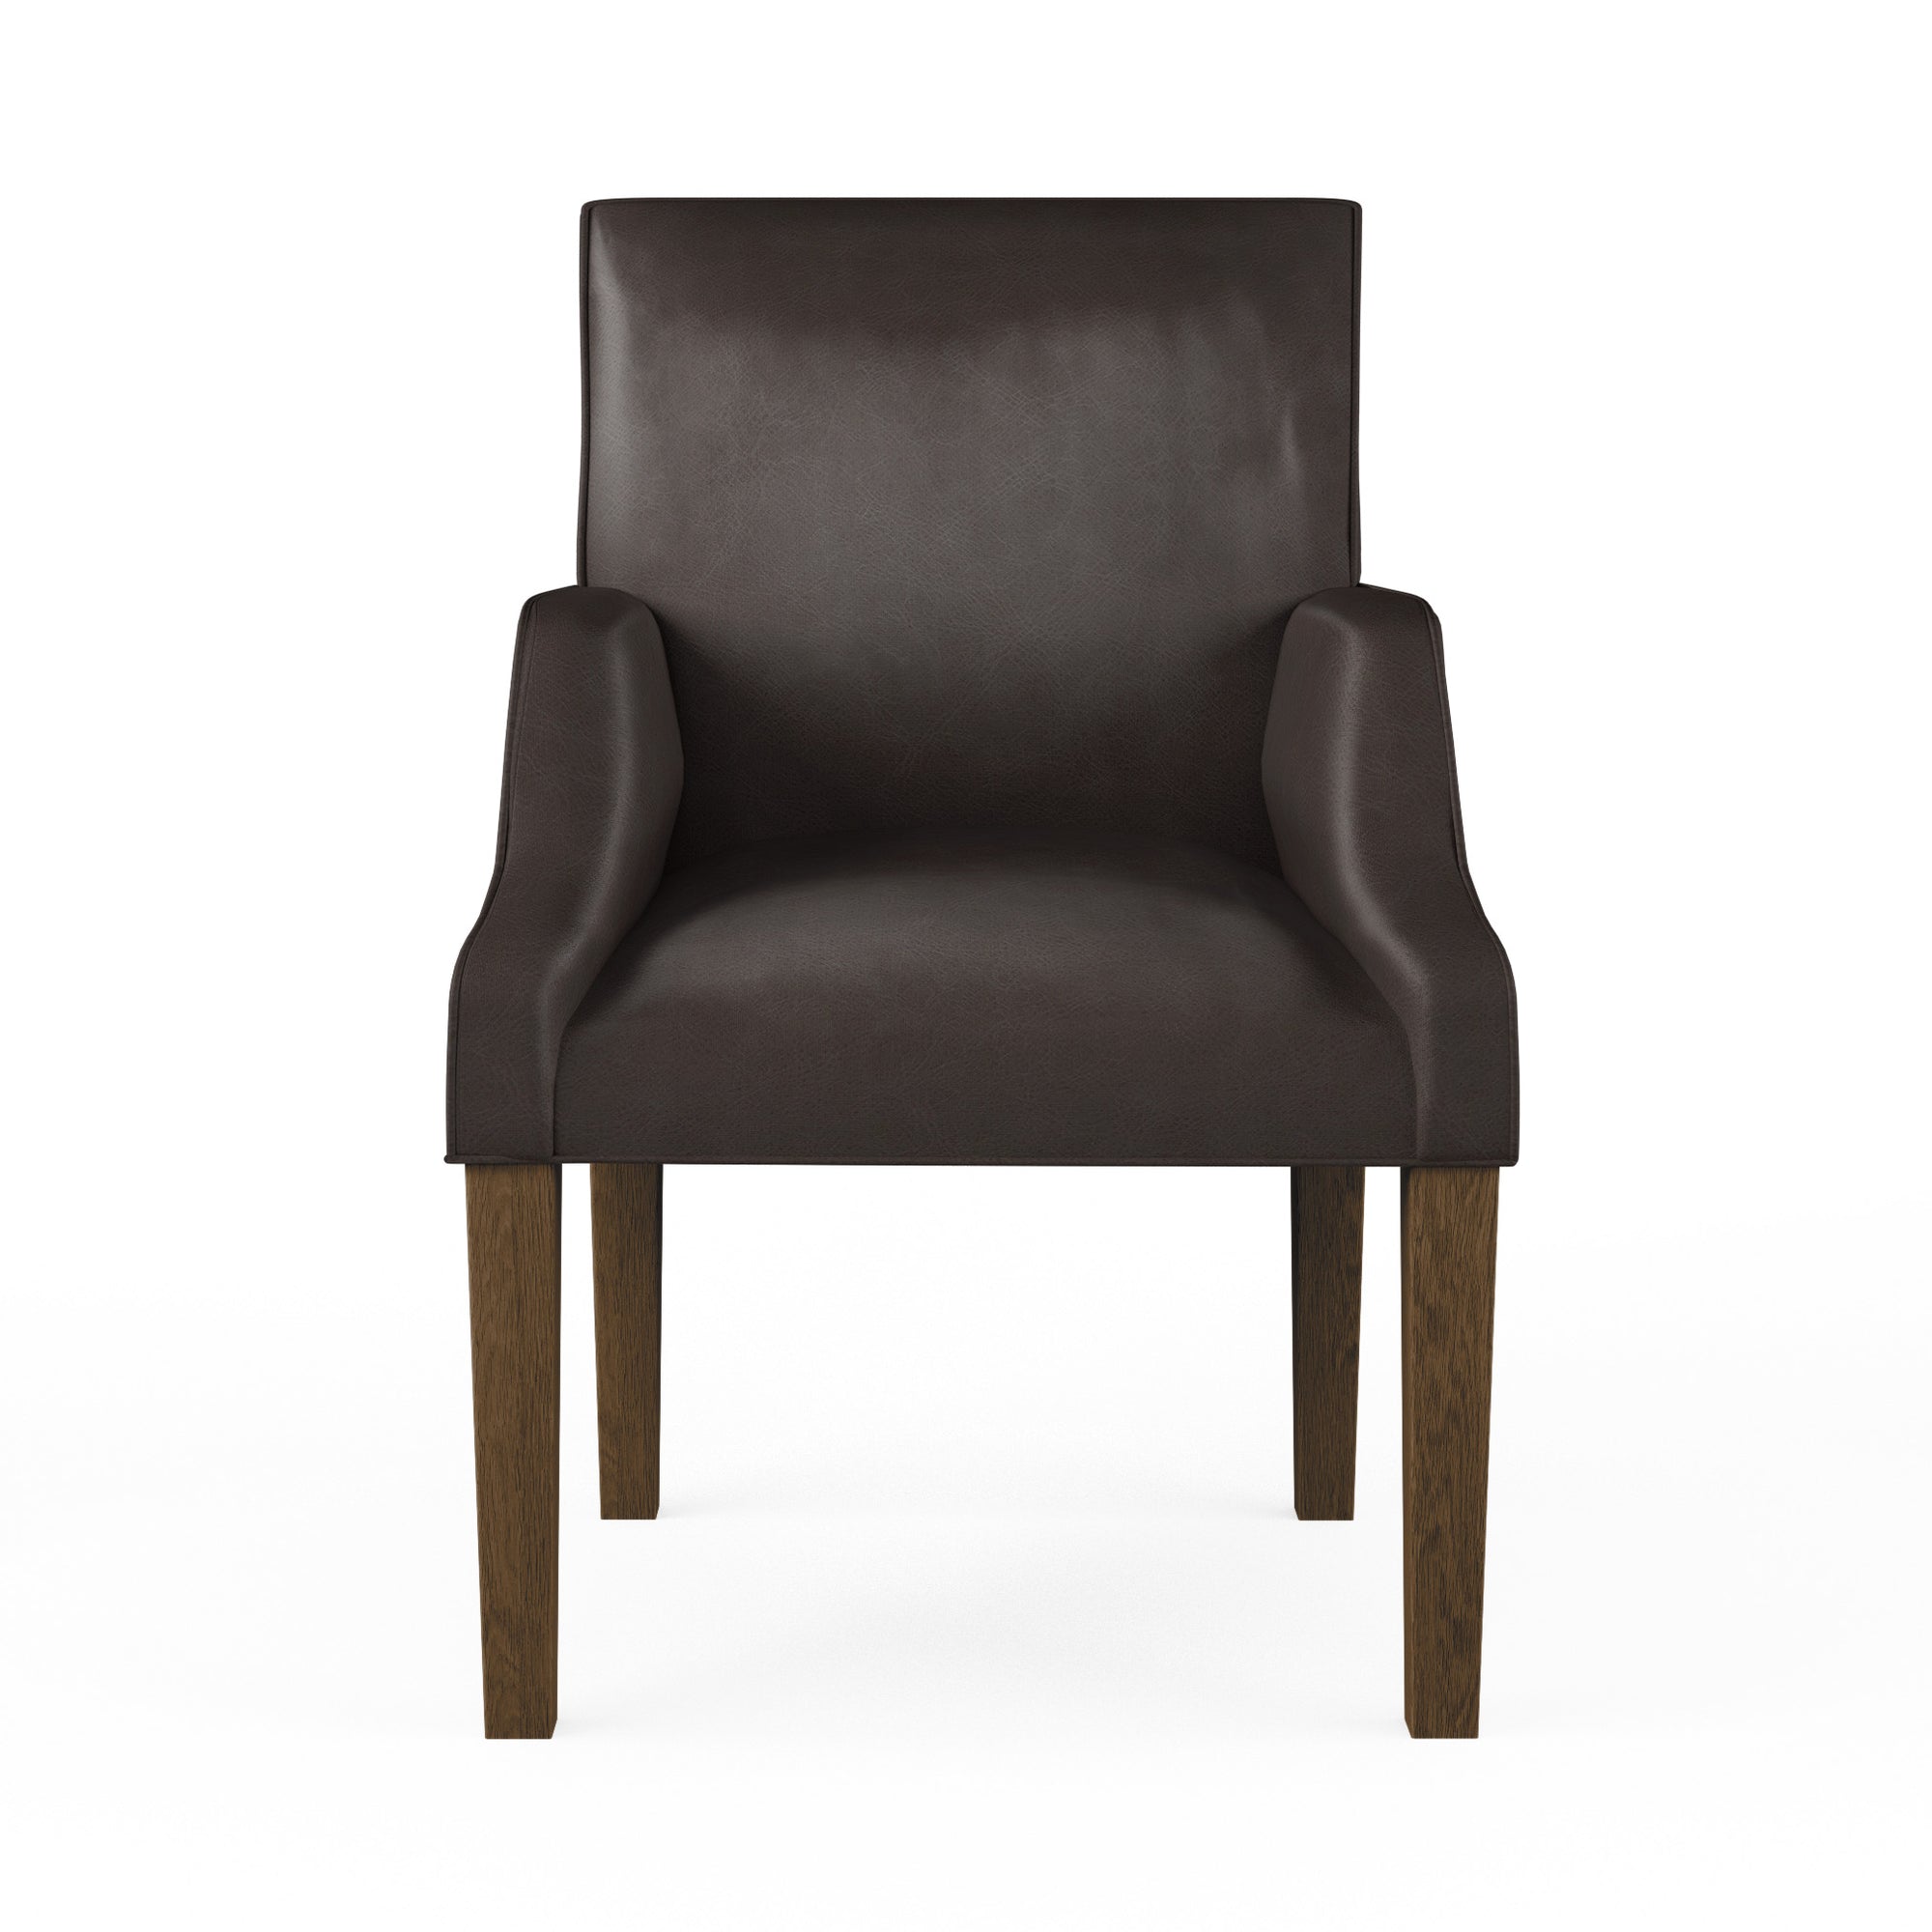 Juliet Dining Chair - Chocolate Vintage Leather